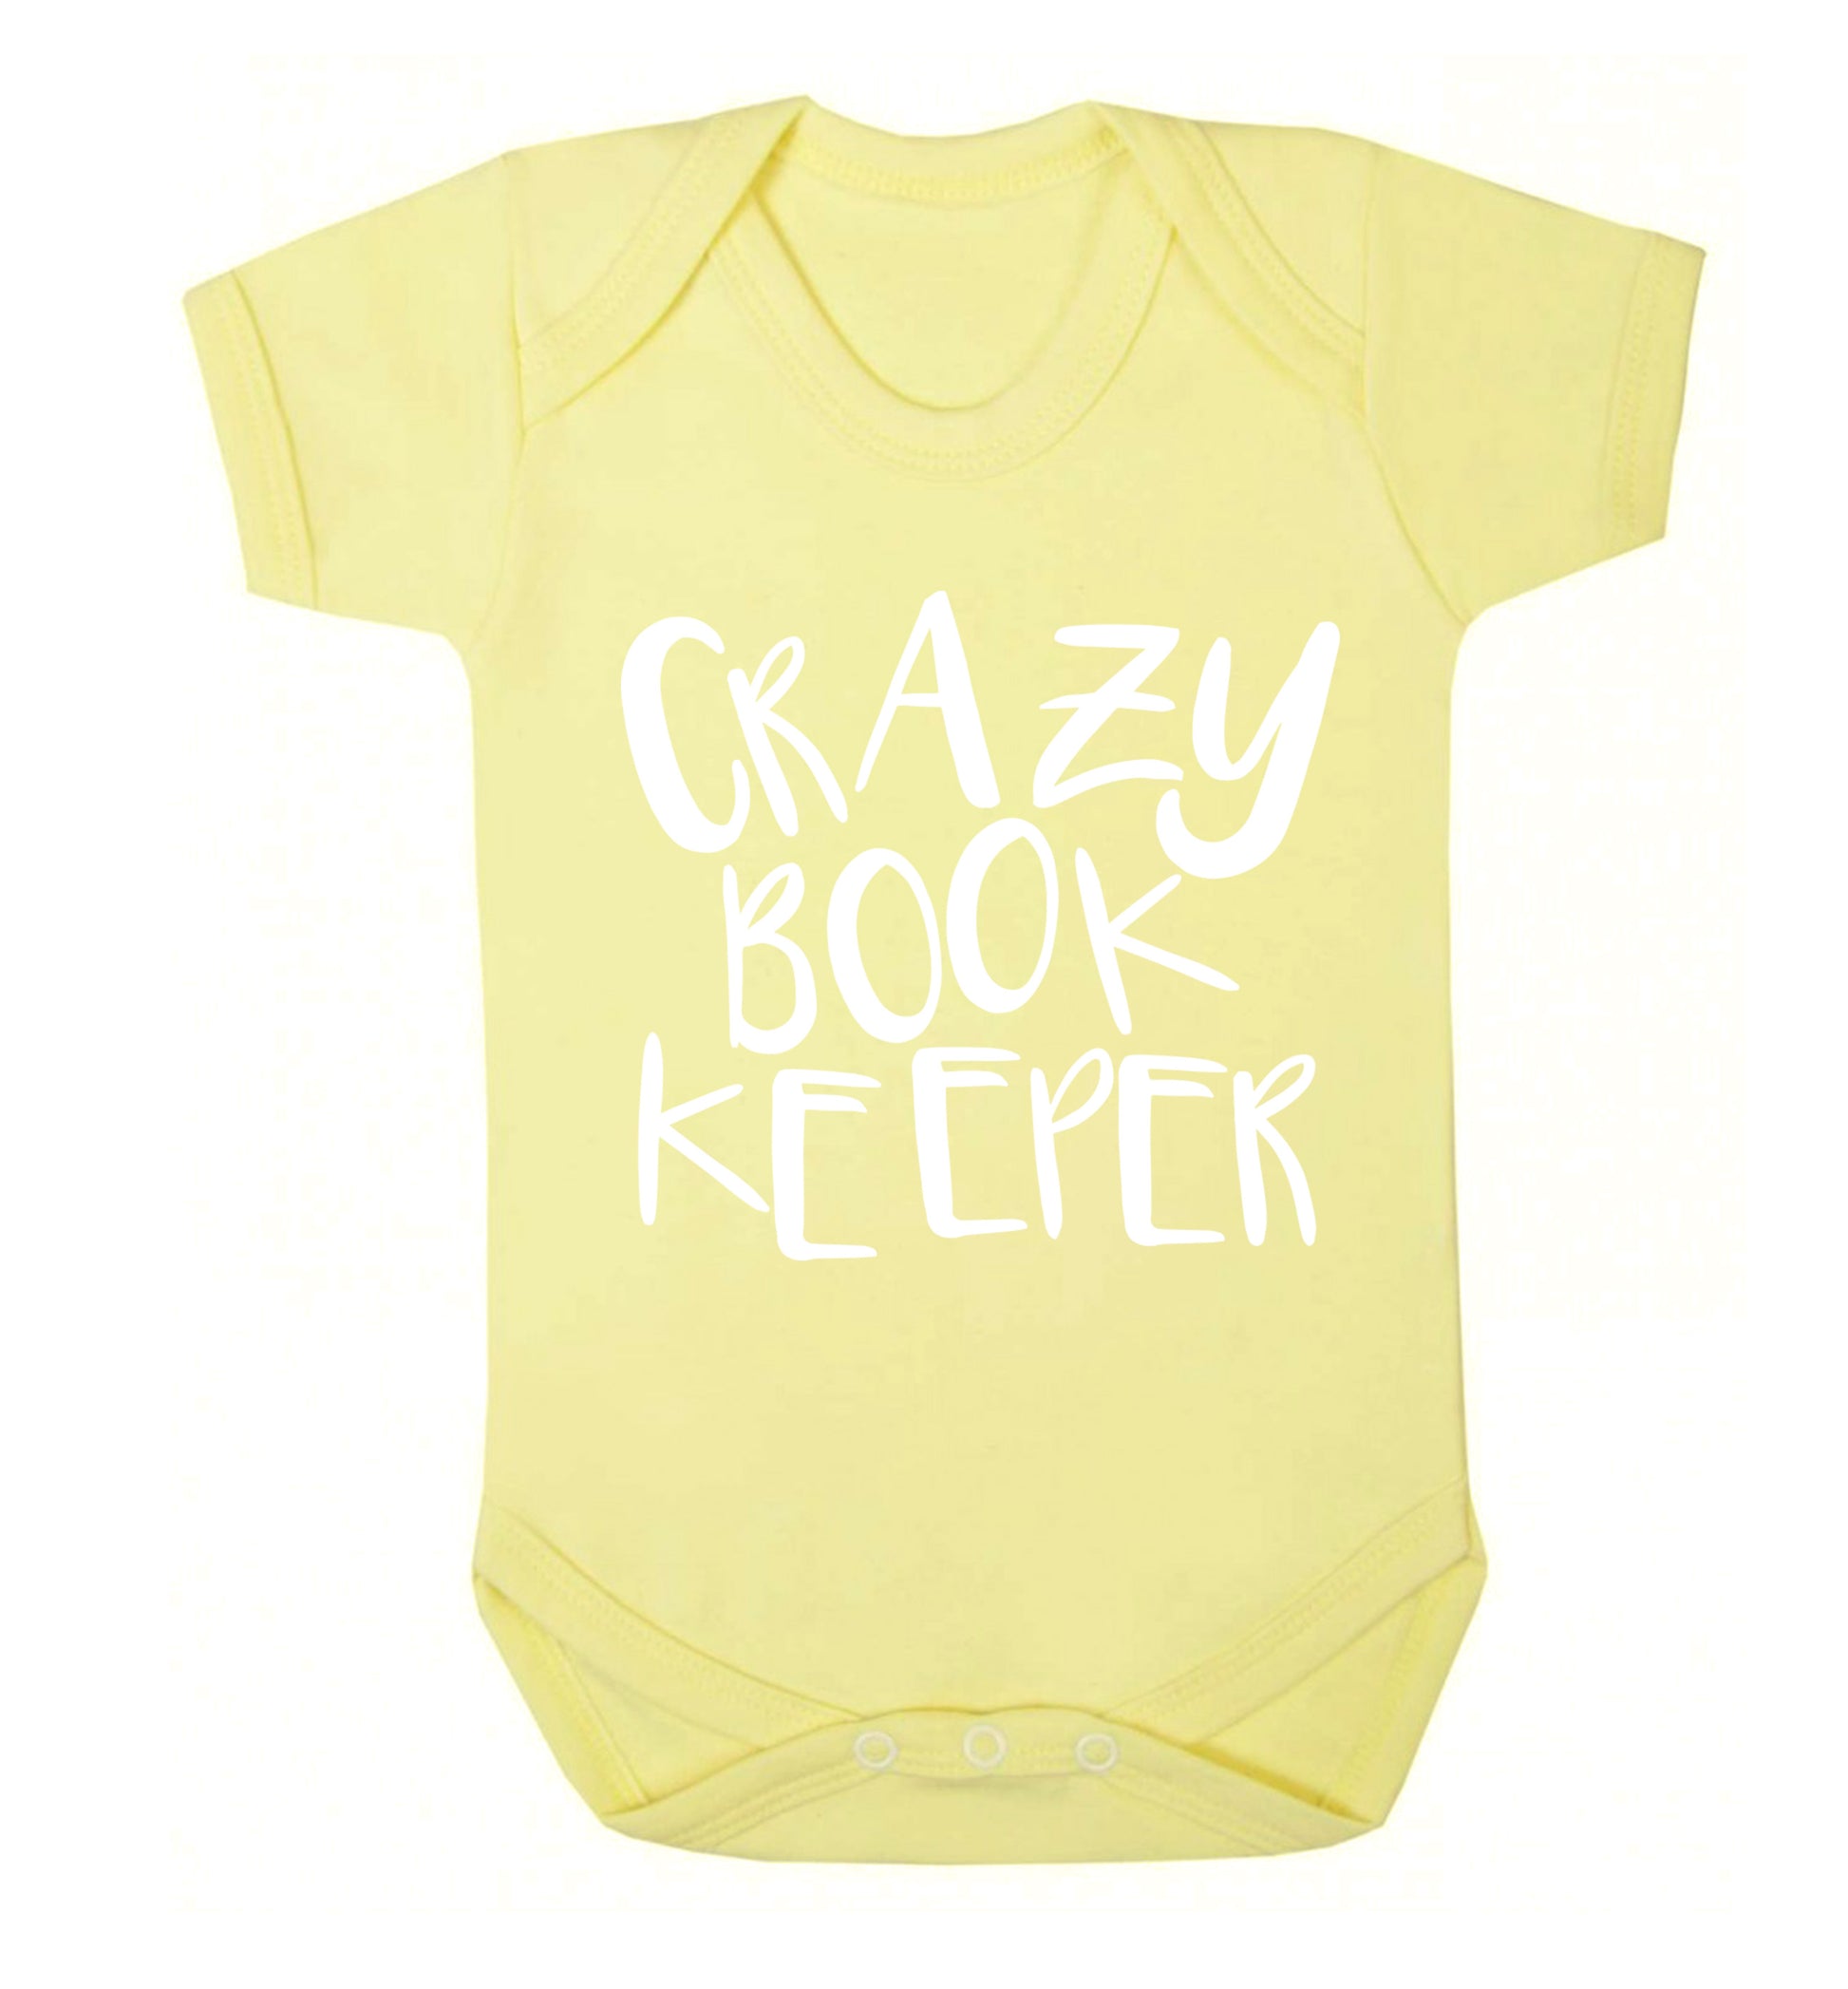 Crazy bookkeeper Baby Vest pale yellow 18-24 months